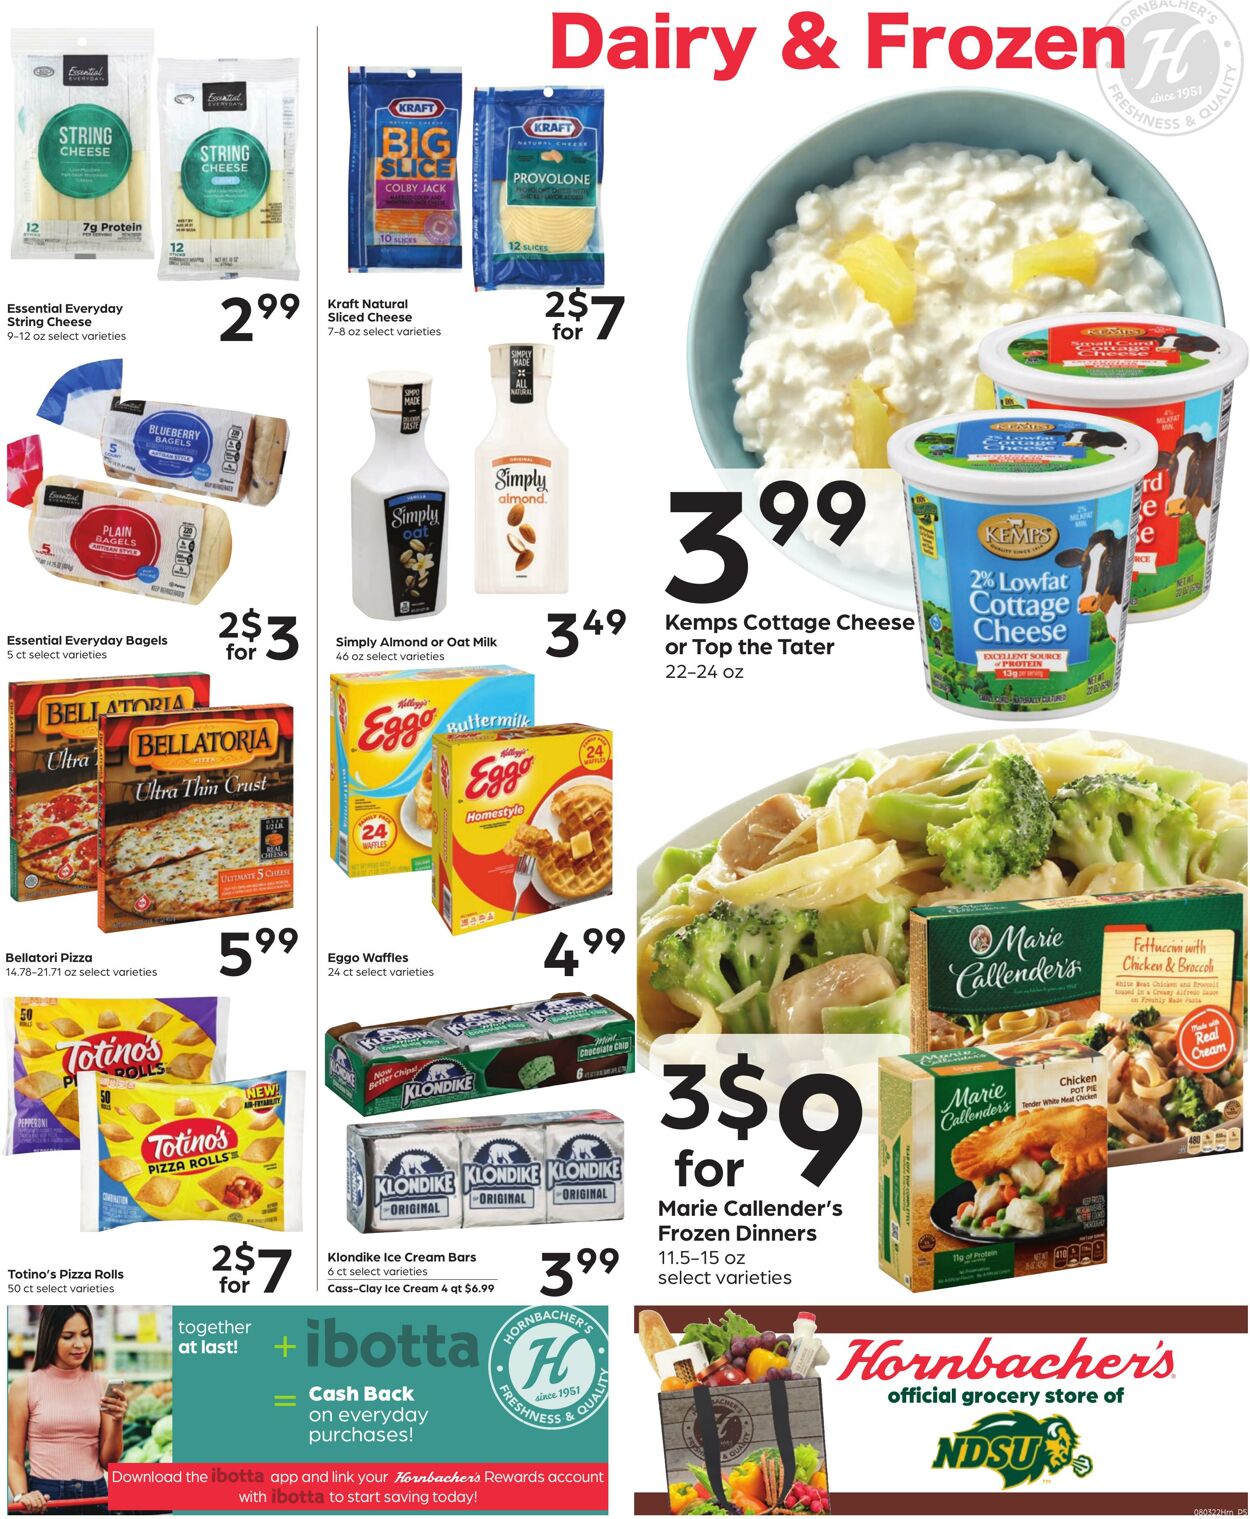 Weekly ad Hornbacher's 08/03/2022 - 08/09/2022